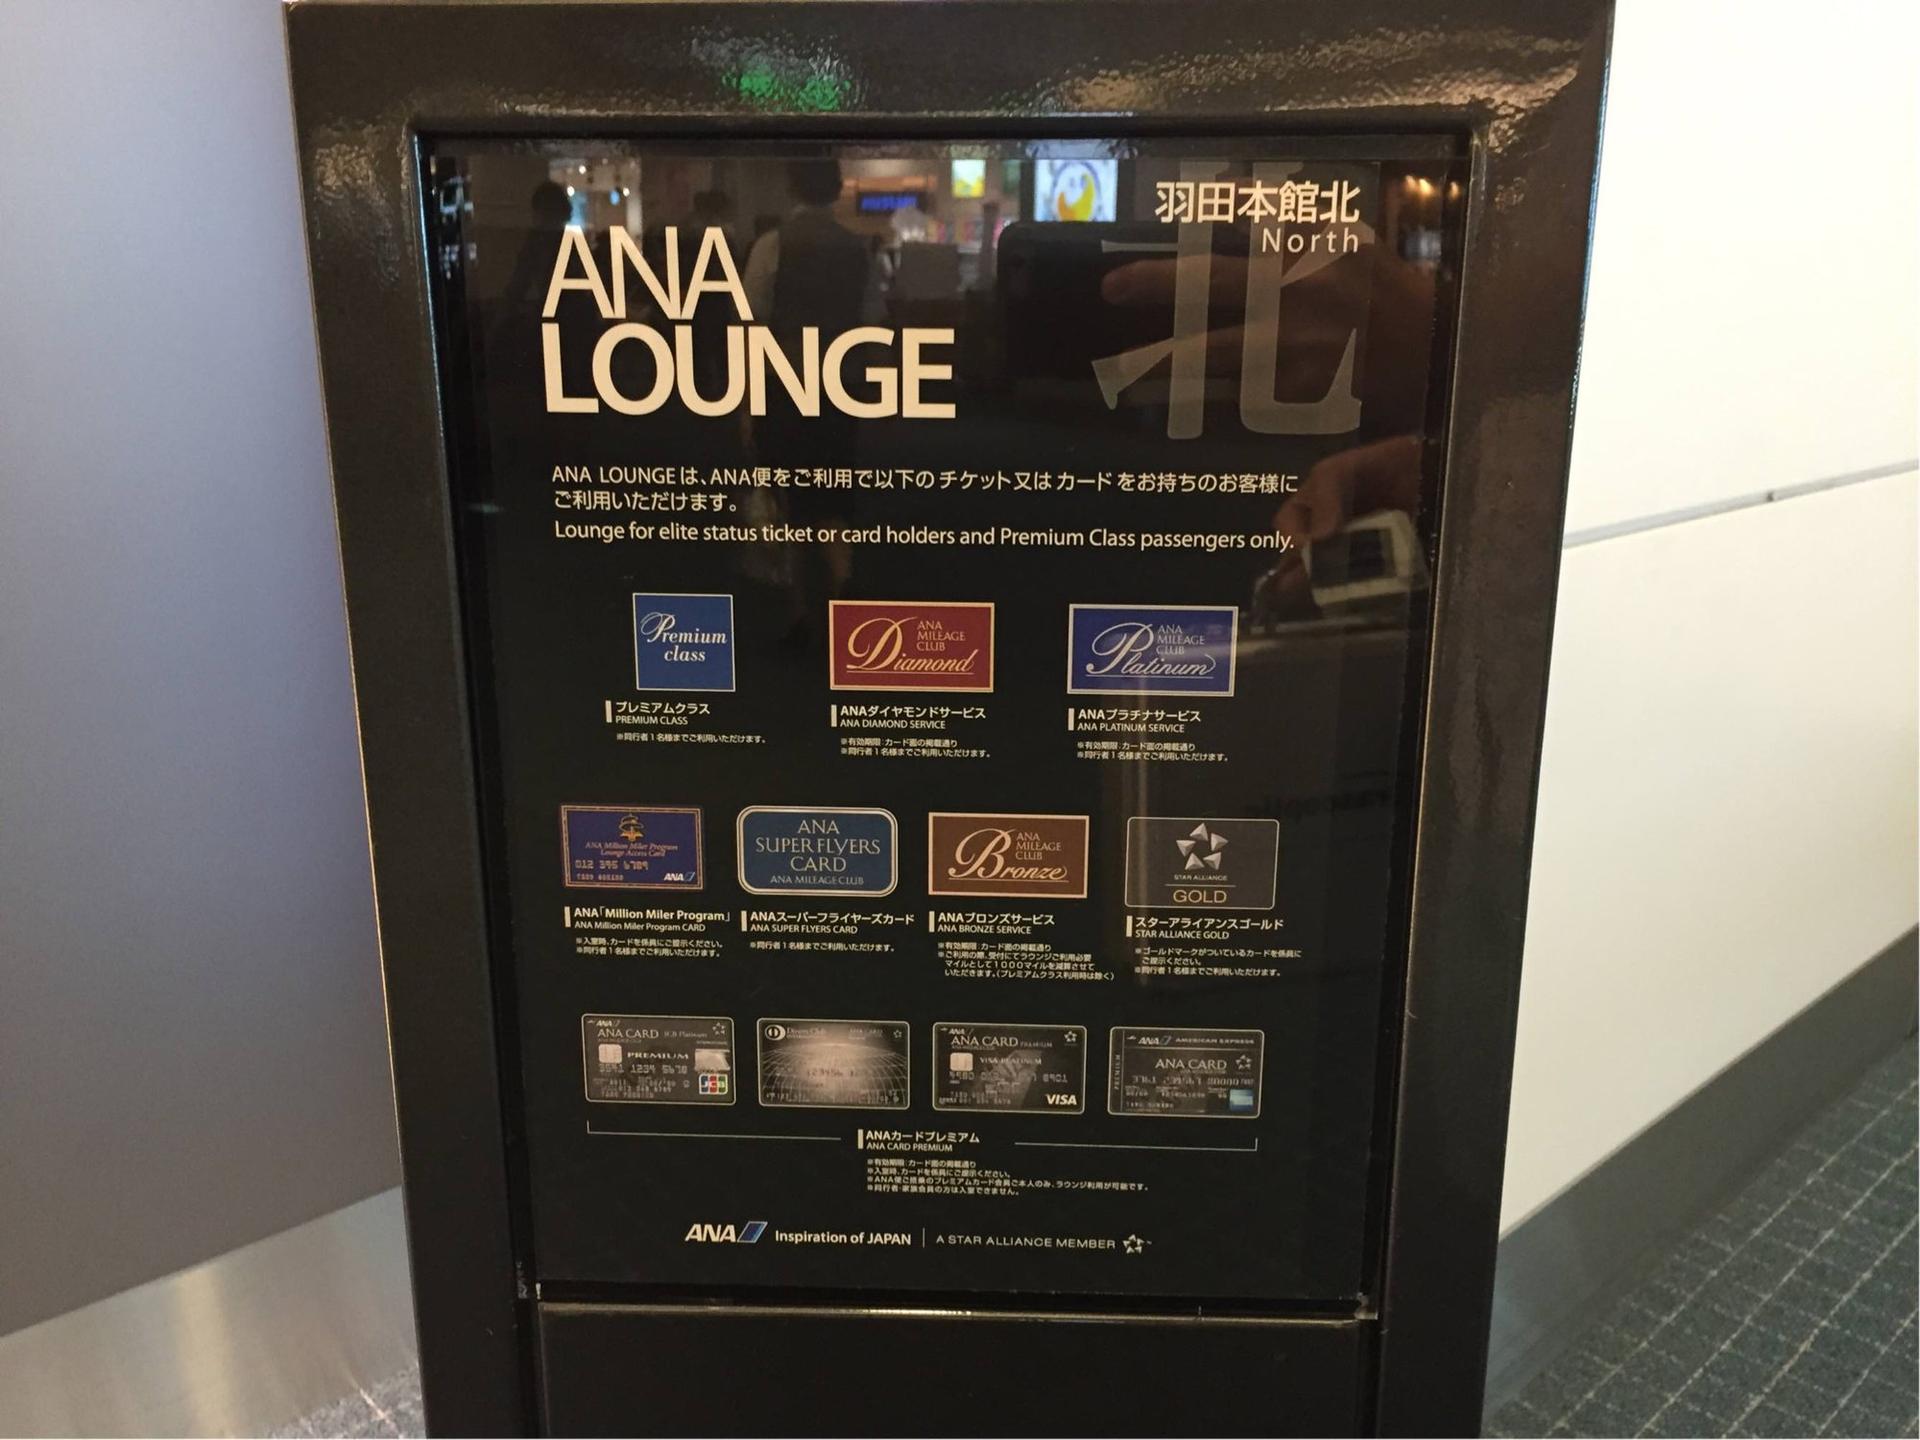 All Nippon Airways ANA Lounge (Gate 60) image 1 of 10